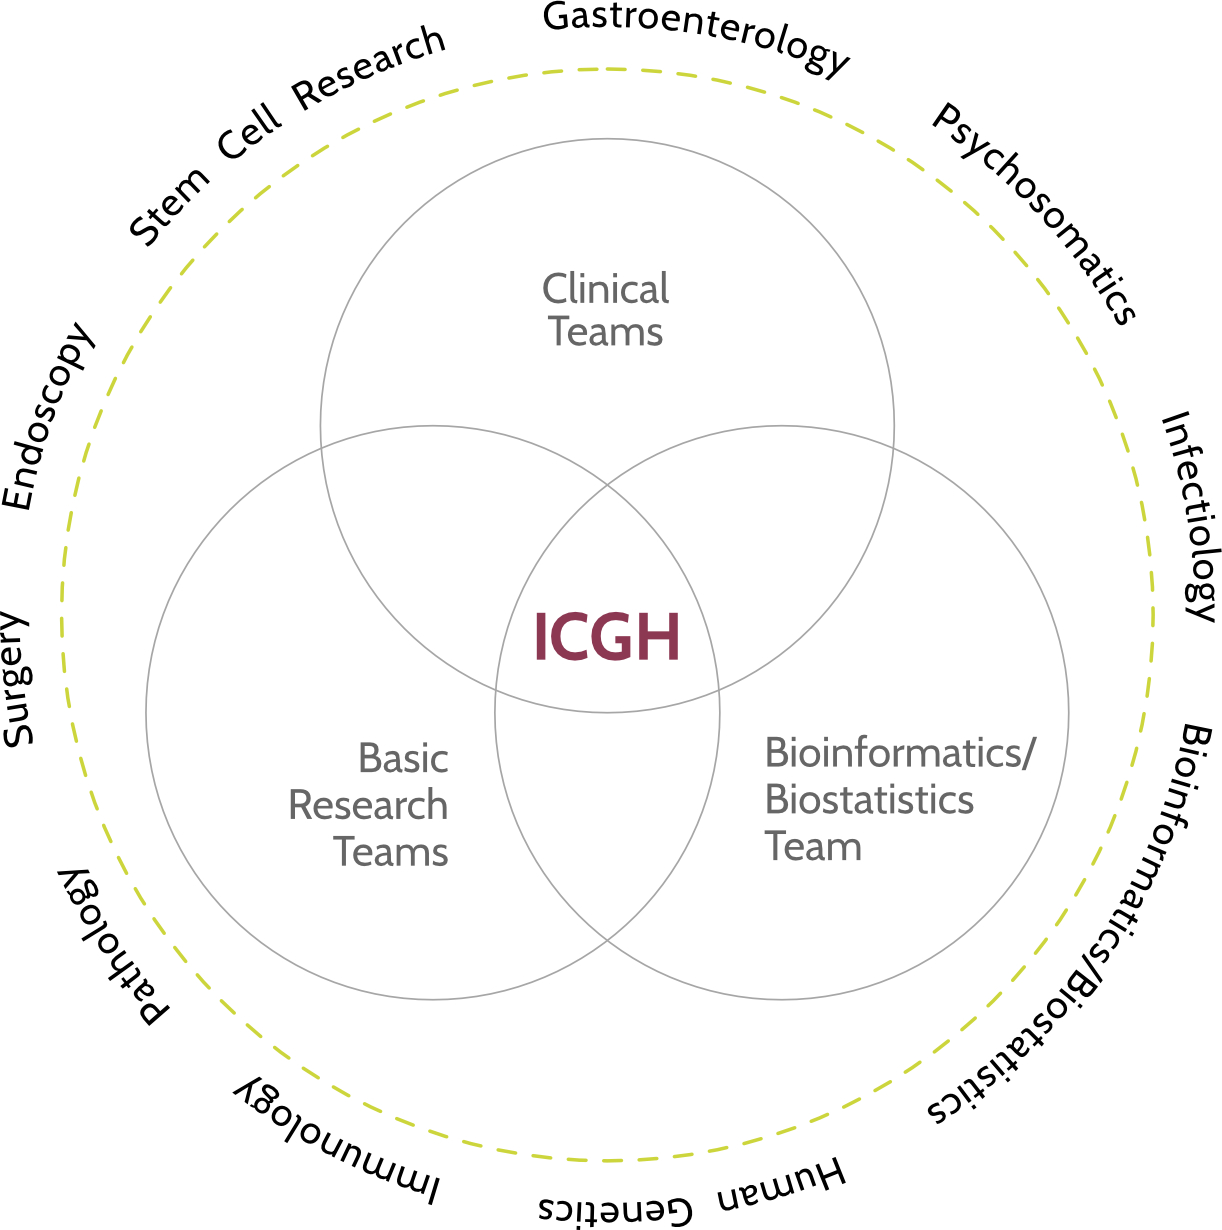 The Interdisciplinary Center for Gut Health (ICGH) brings together experts from multiple disciplines to advance complementary research in the field of gut health.